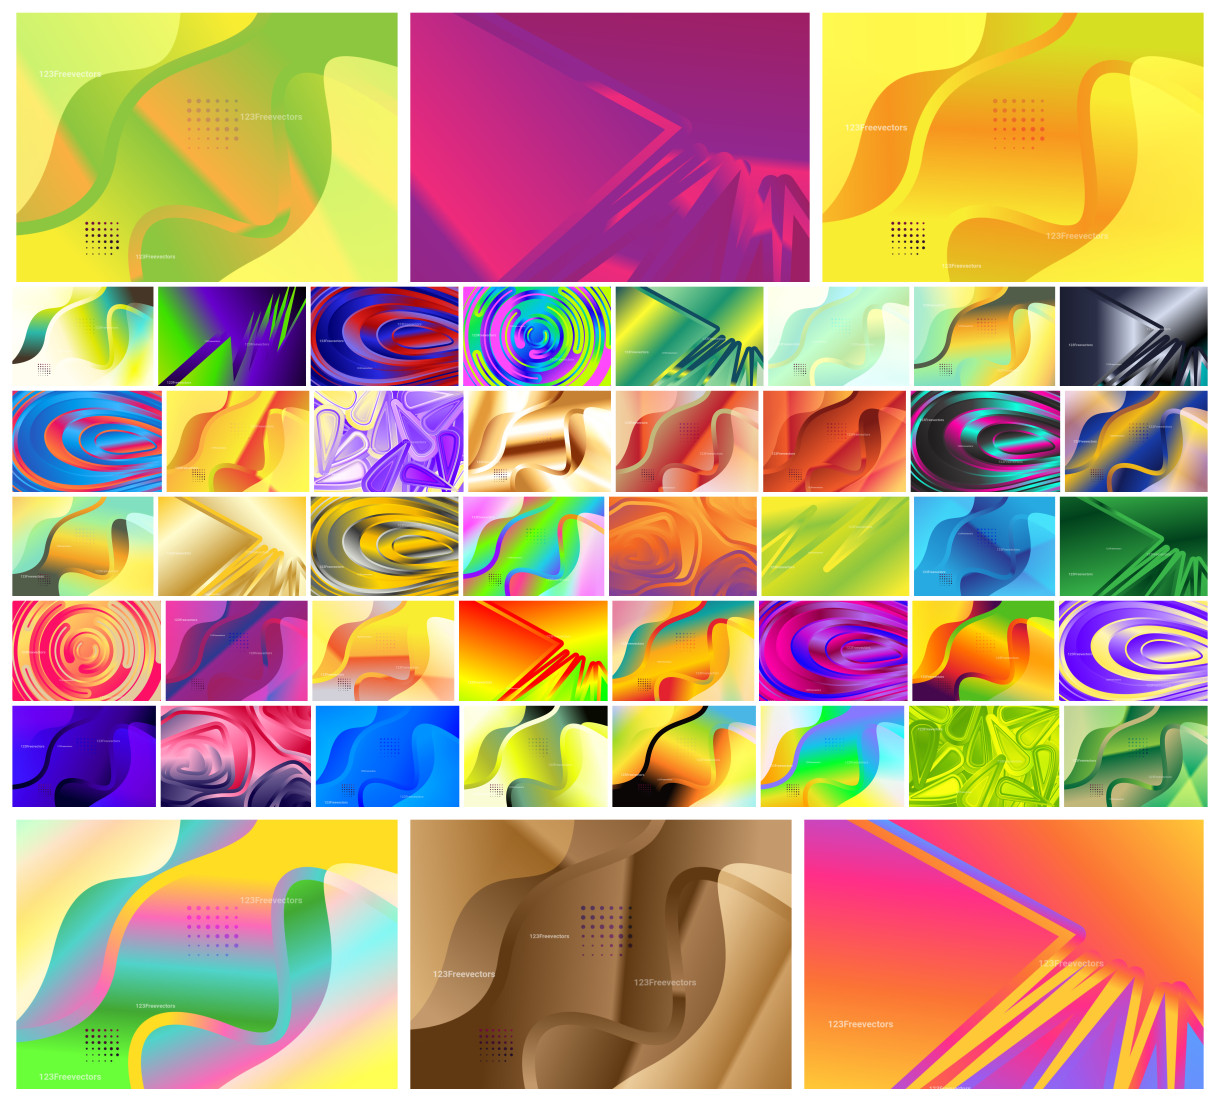 Captivating Liquid Vector Designs: A Colorful Spectacle